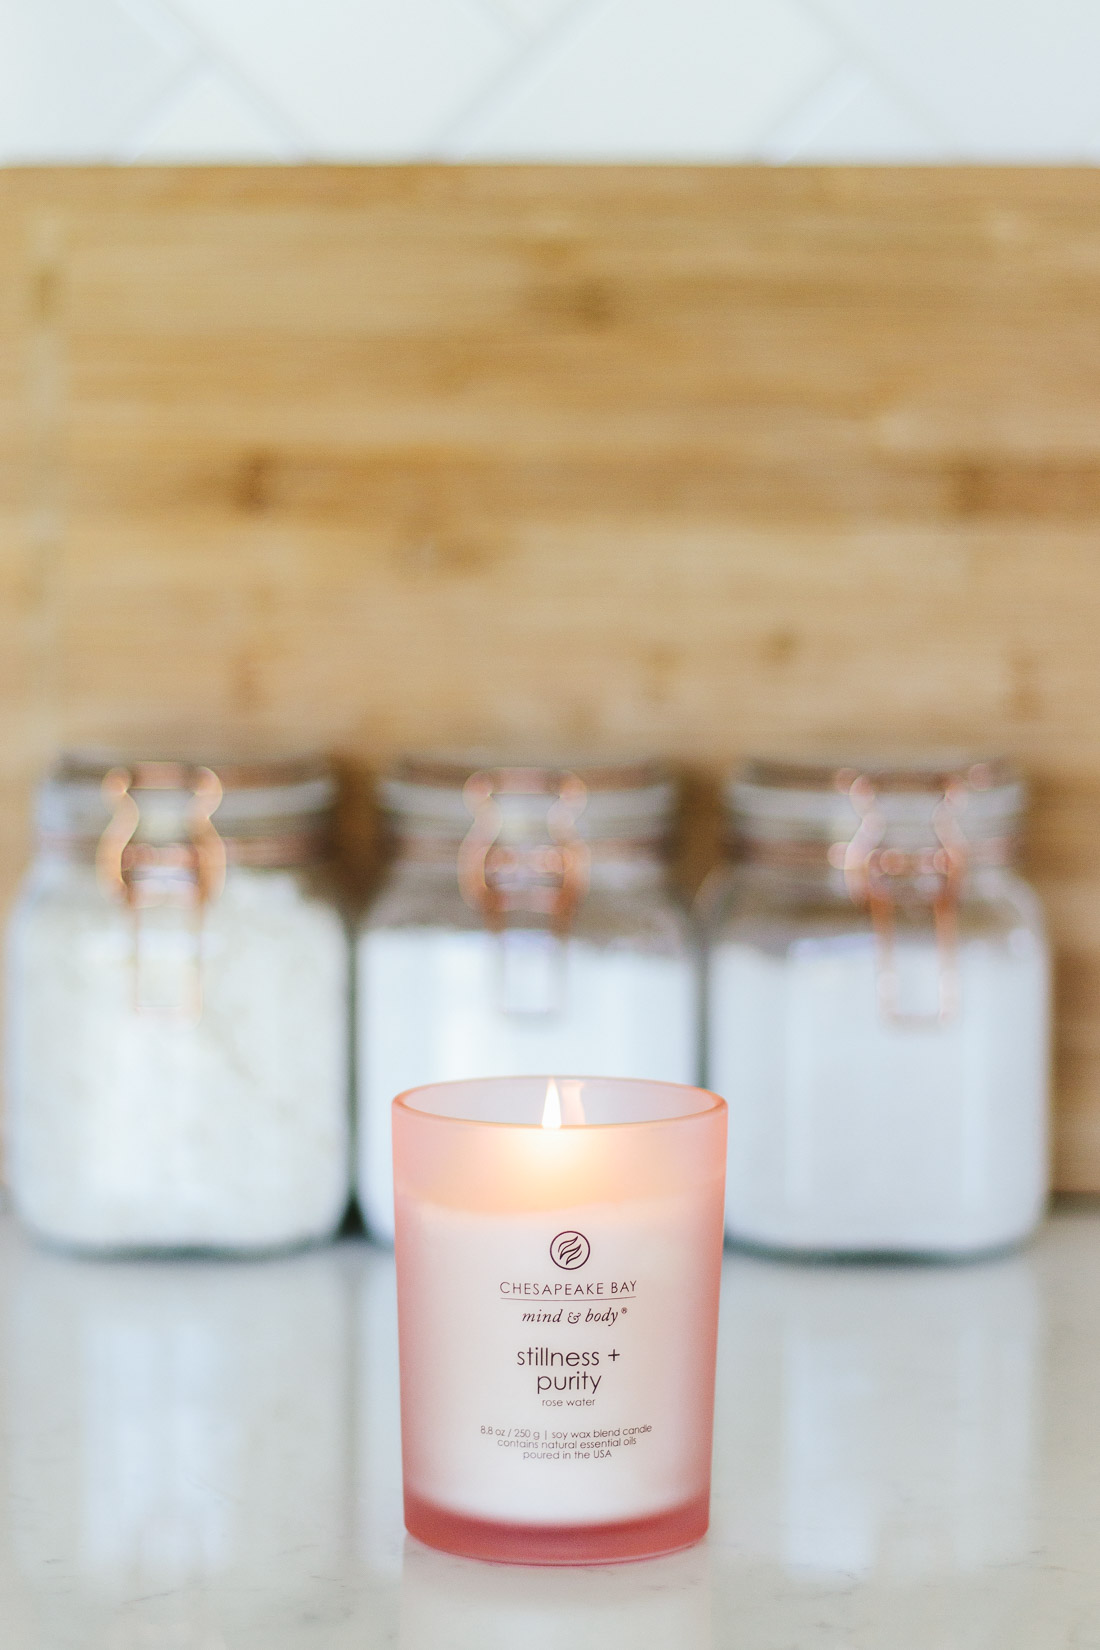 Chesapeake Bay Candle review, essential oil candles I love